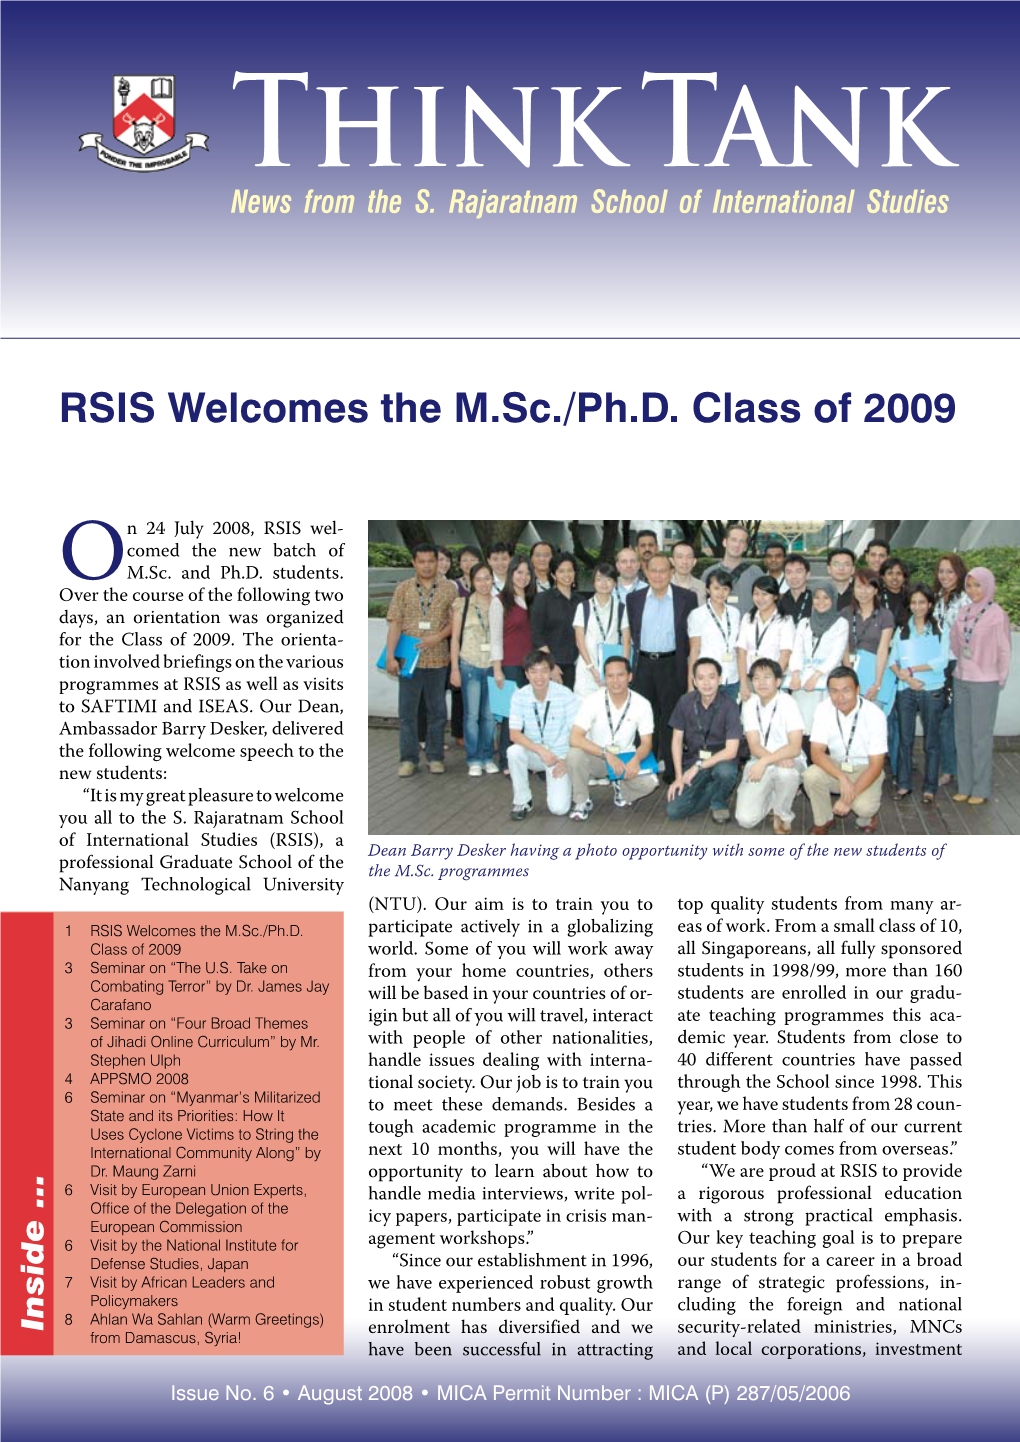 RSIS Welcomes the M.Sc./Ph.D. Class of 2009